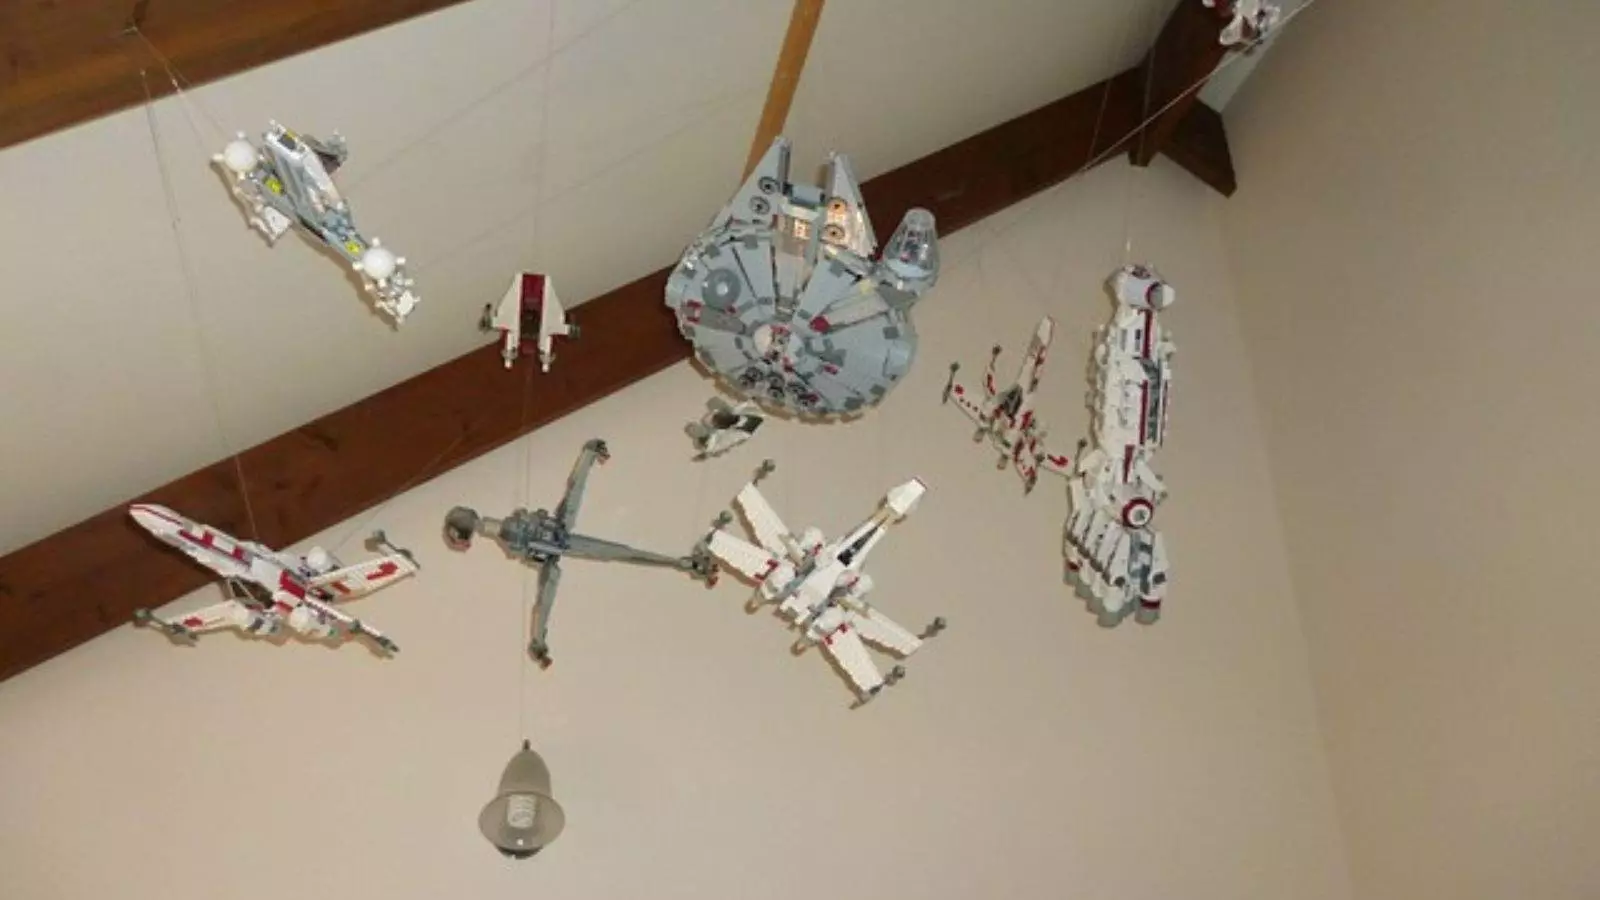 Sourced from Ceiling? - LEGO Star Wars